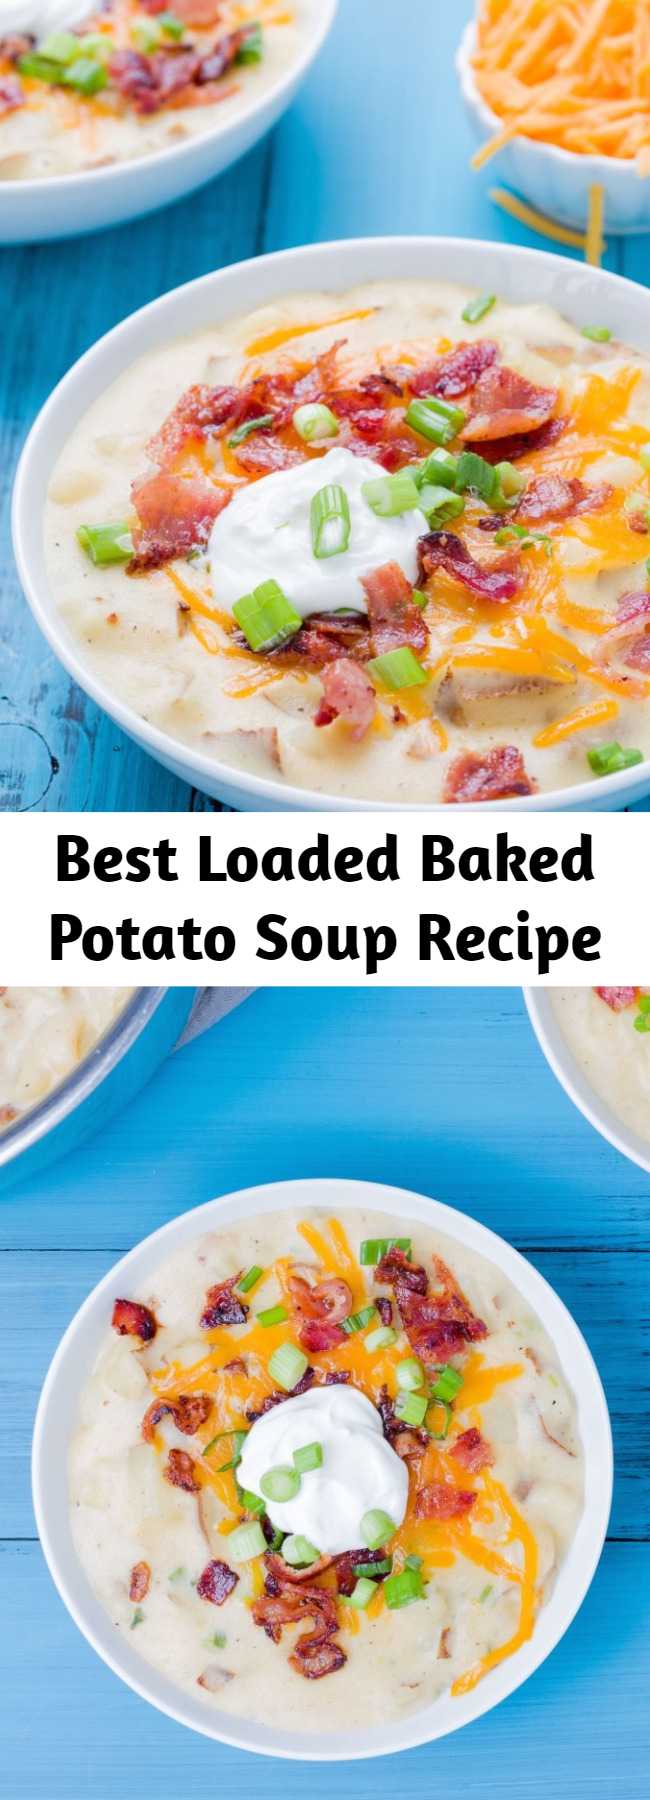 Best Loaded Baked Potato Soup Recipe - Imagine all your favorite baked potato toppings—bacon, cheddar, sour cream, green onions—in a spoon with this recipe.